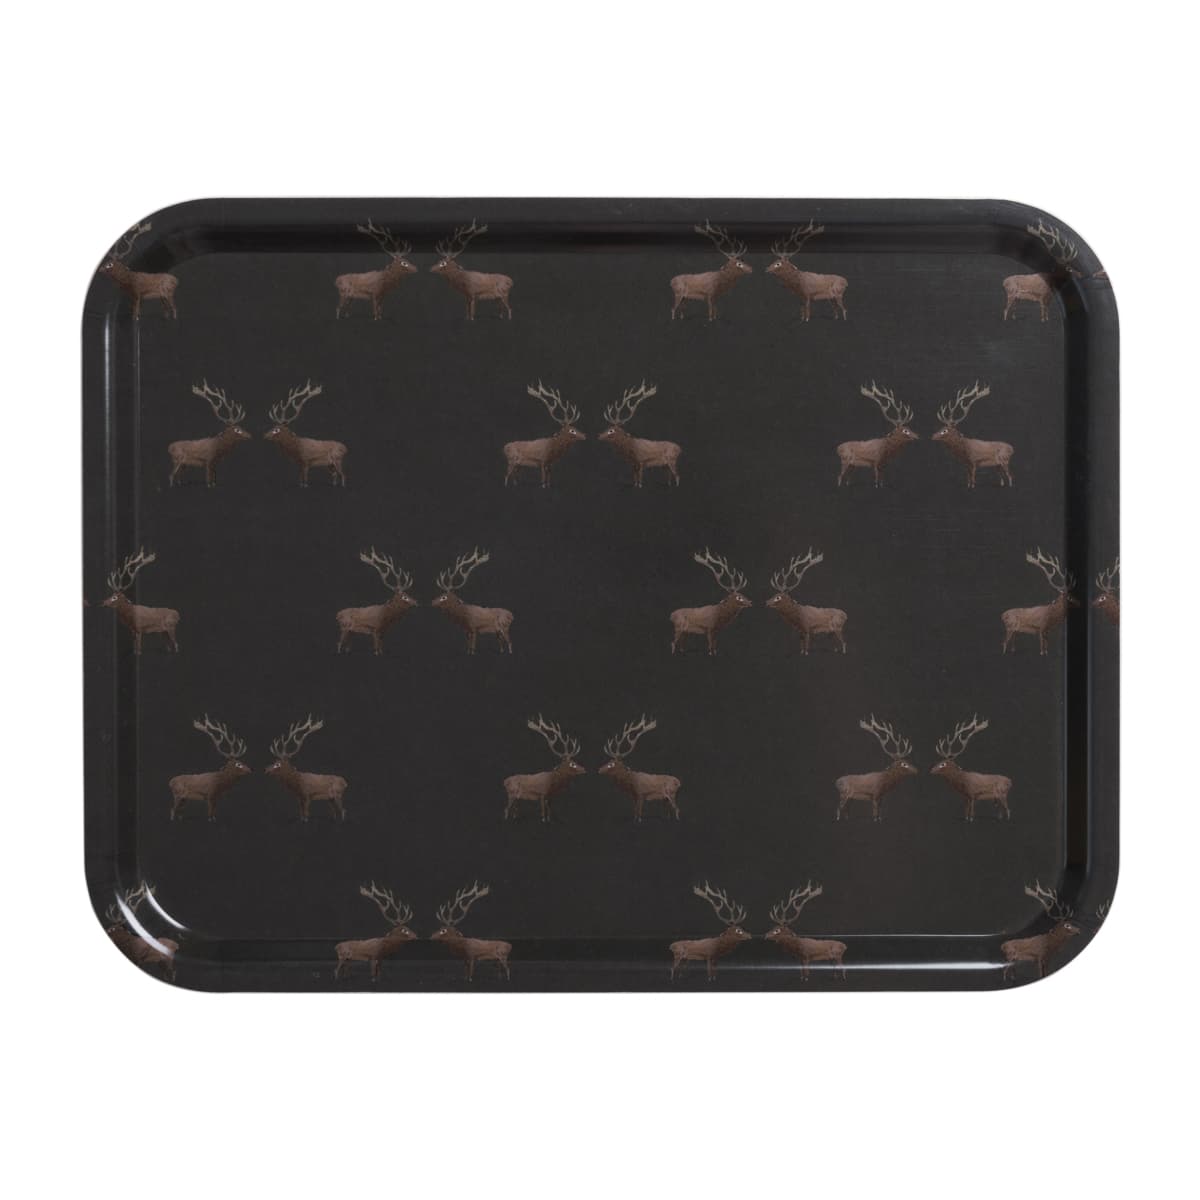 Highland Stag Printed Tray